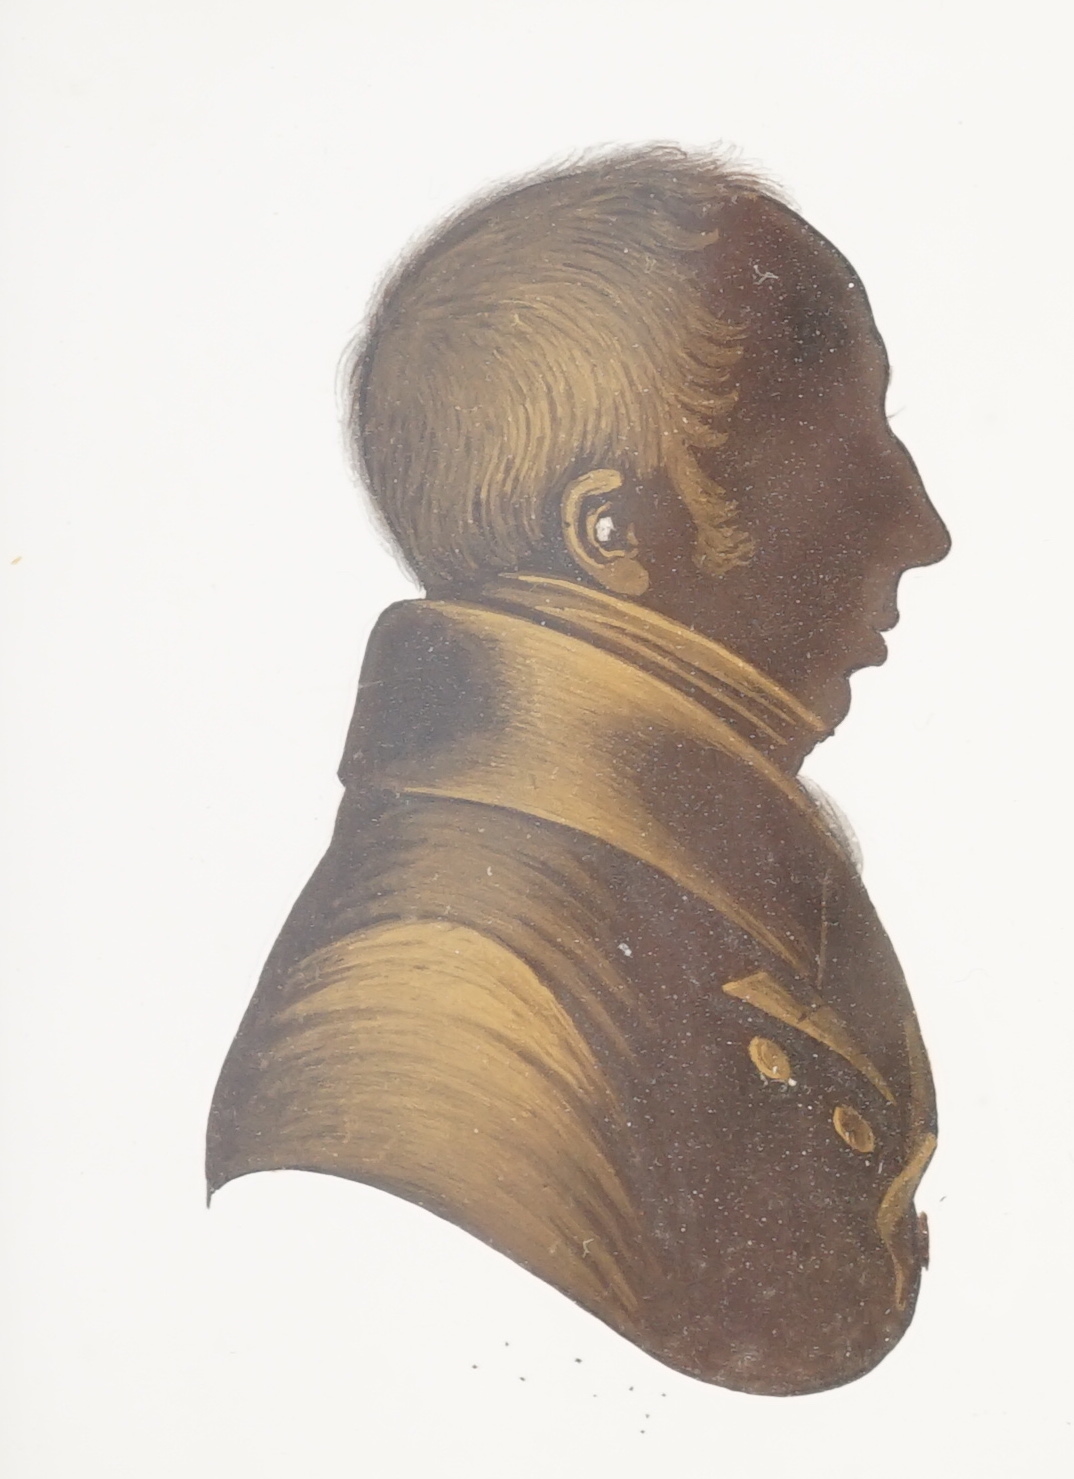 John Miers (1756-1821) and John Field (1772-1848), Silhouette of a gentleman, painted and bronzed plaster, 7.6 x 6.1cm.